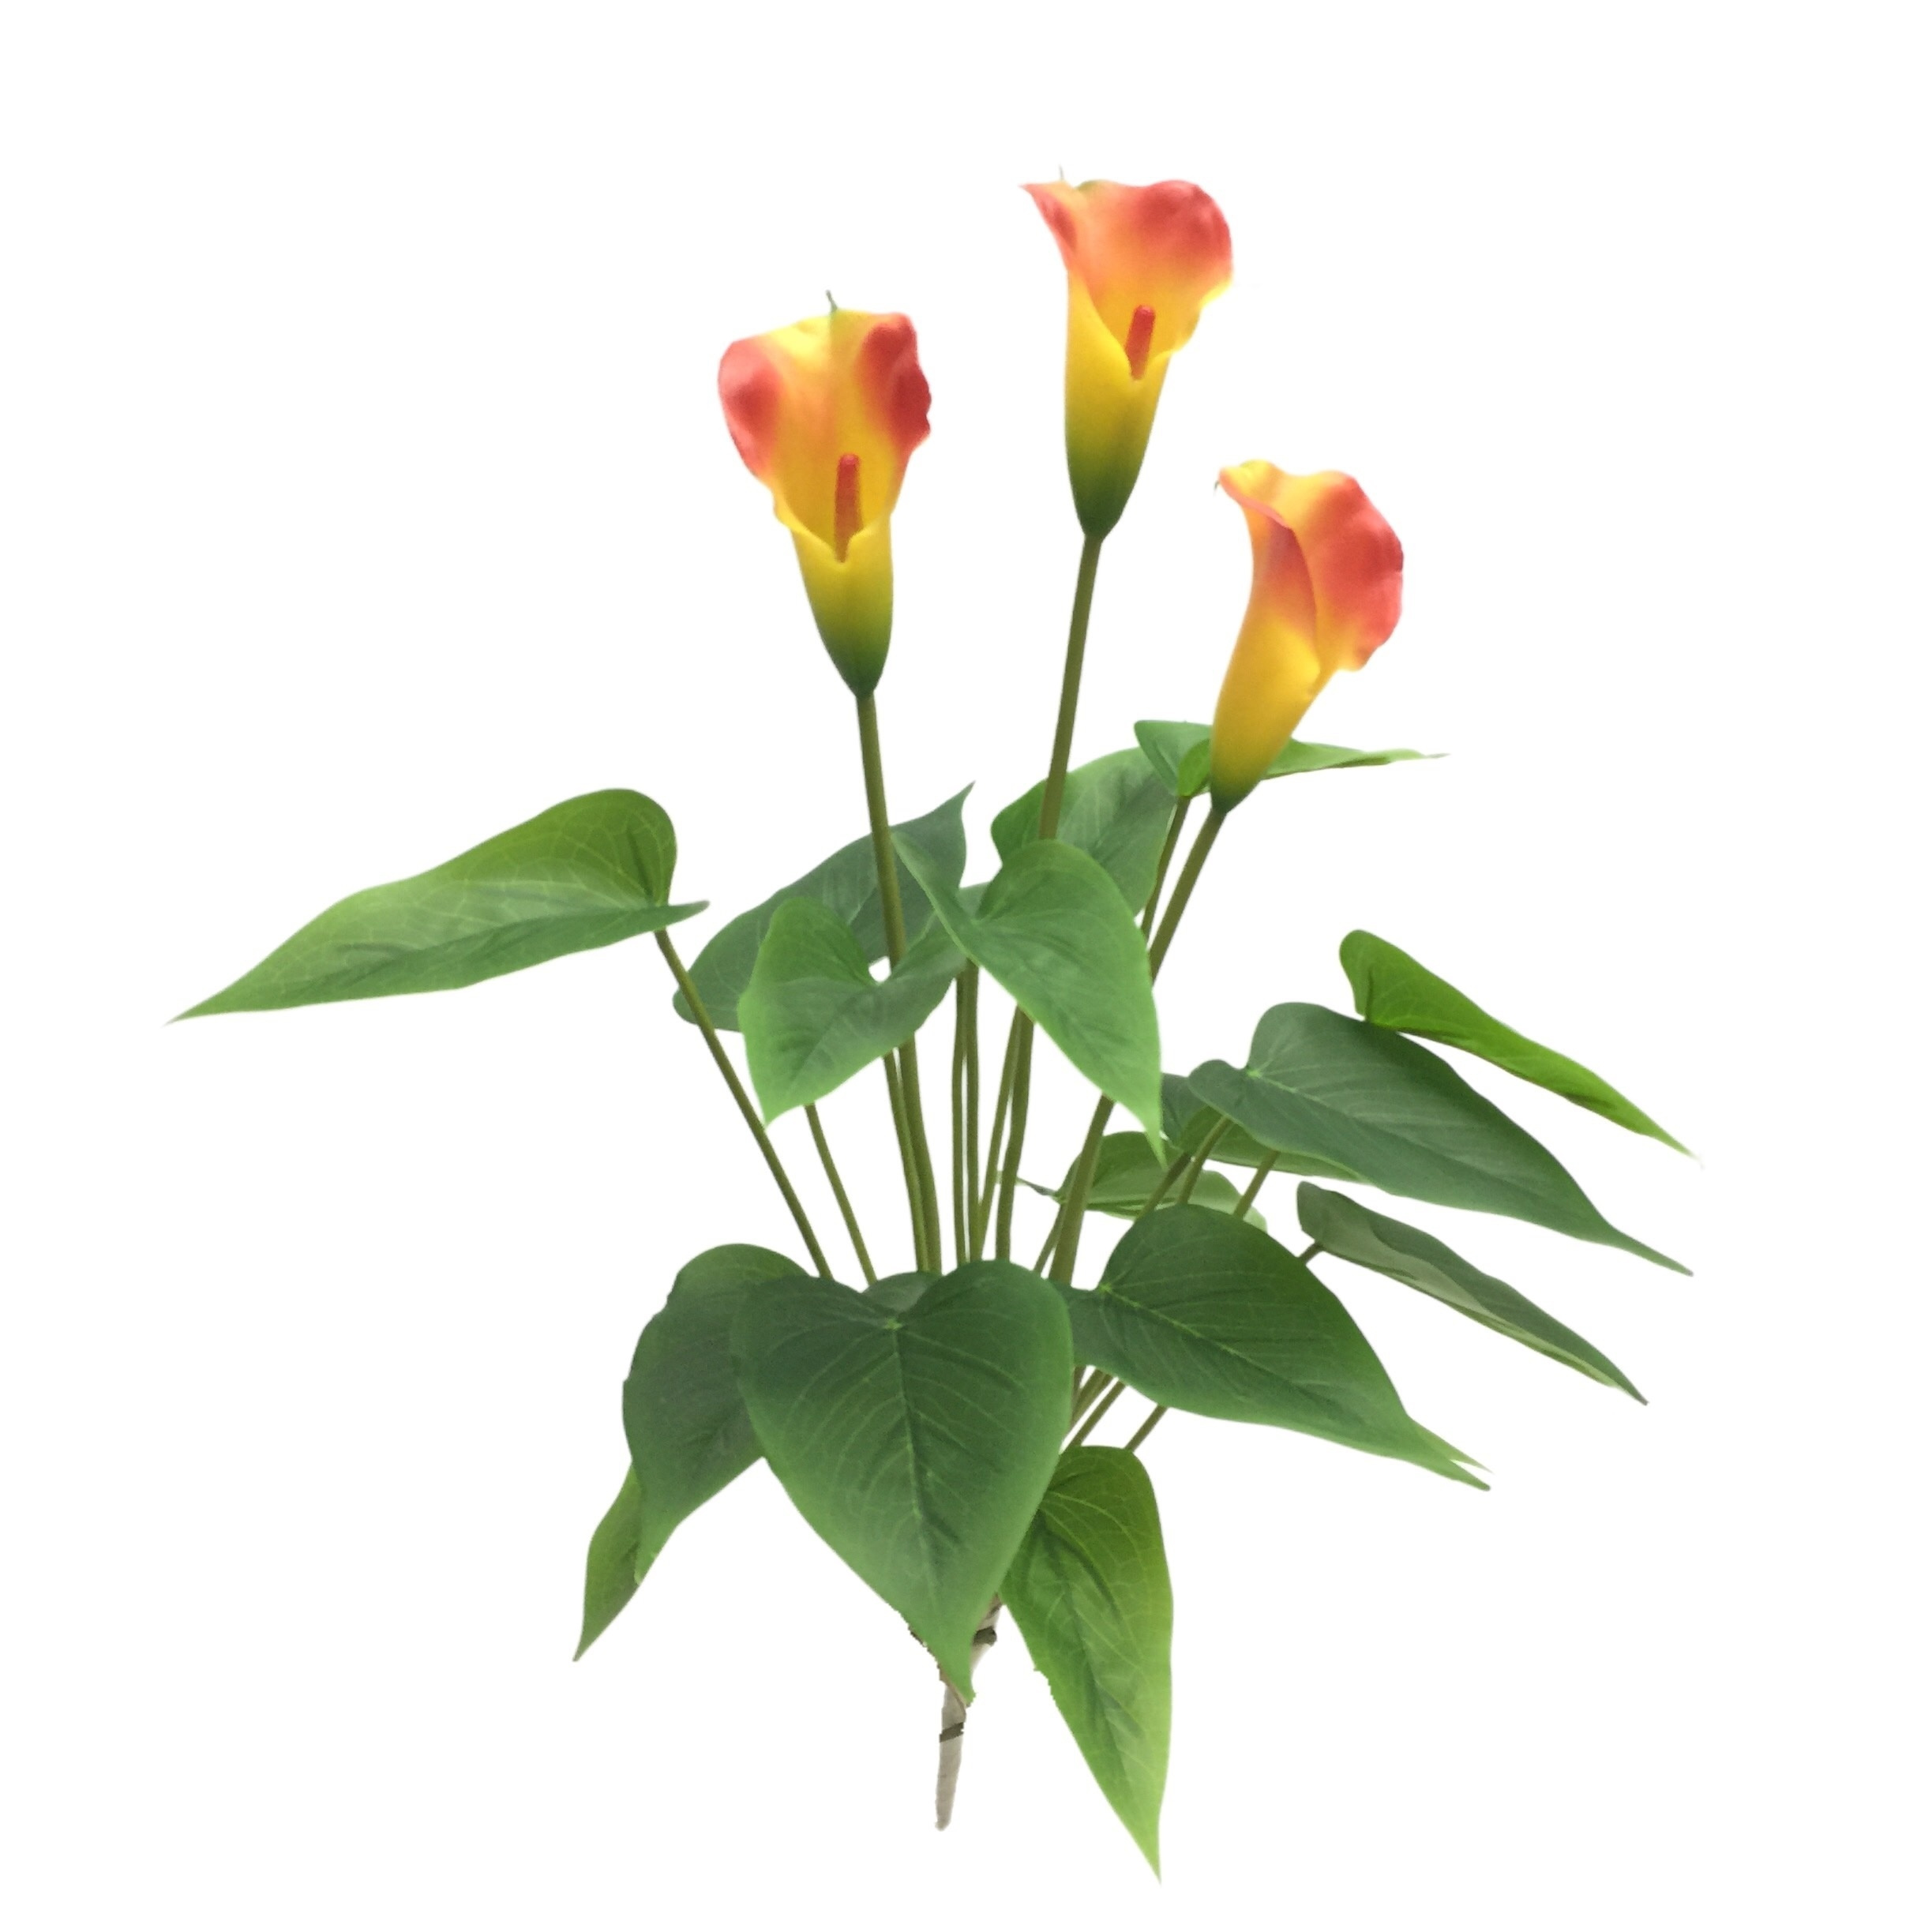 

1pc Artificial Flower Plant, Fake Flowers Greenery Plants For Indoor Outdoor Home Office Bedroom Table Centerpieces Party Decoration 17 Inches Without Pot